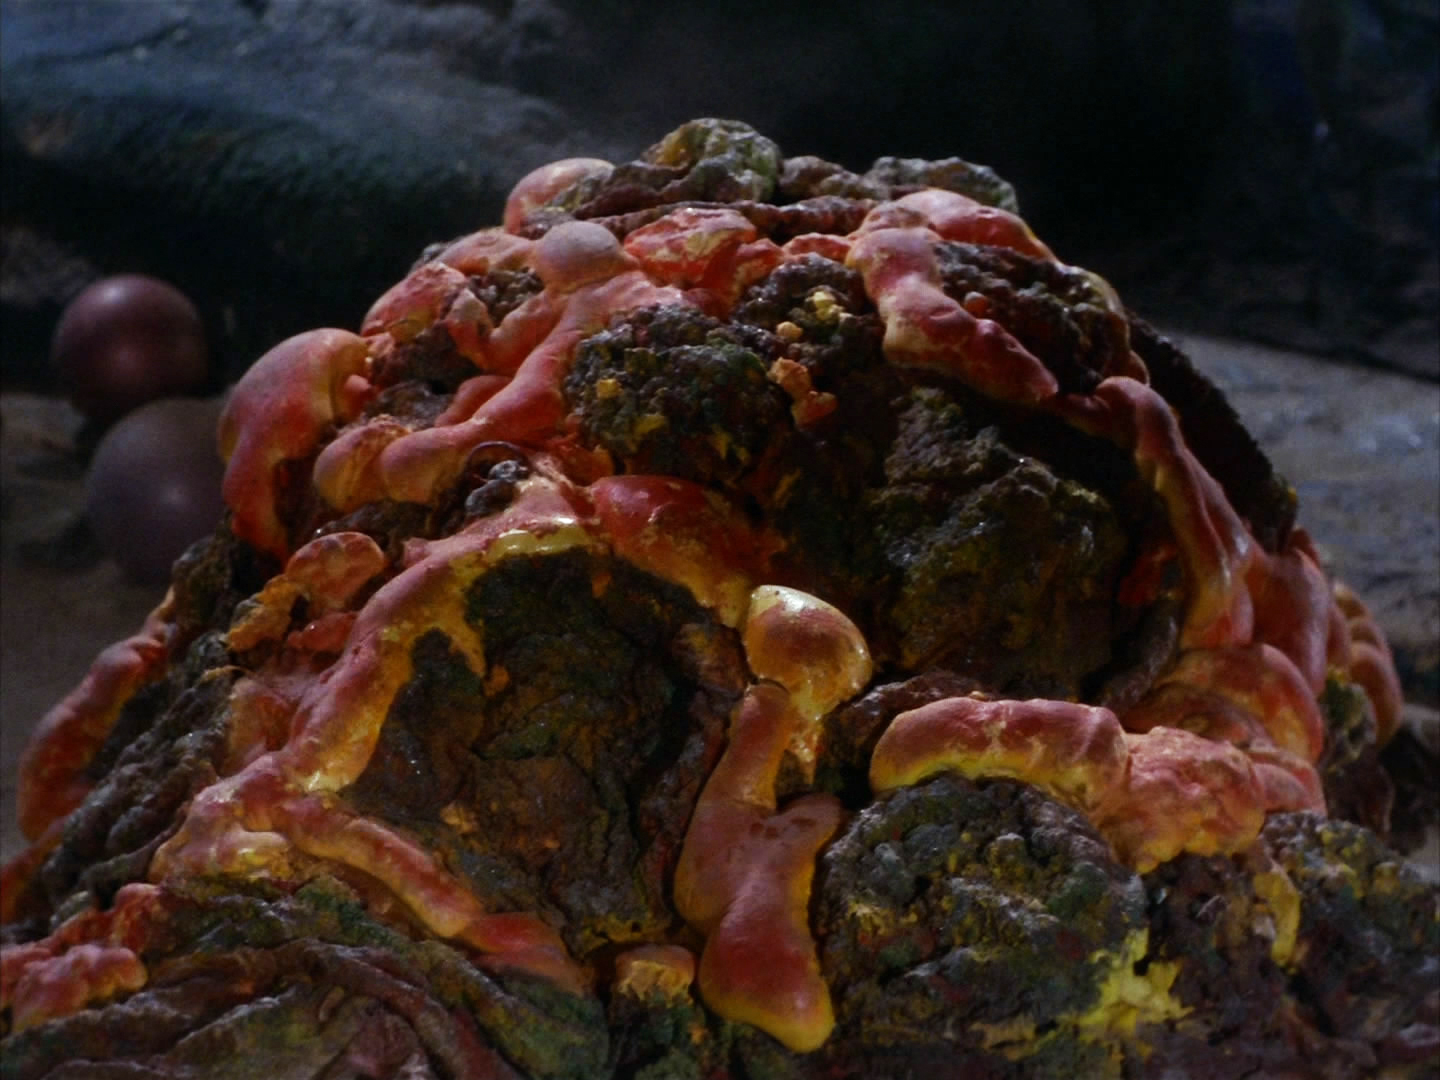 Horta, a silicon based life form from Star Trek. Image credit is Paramount Pictures and/or CBS Studios